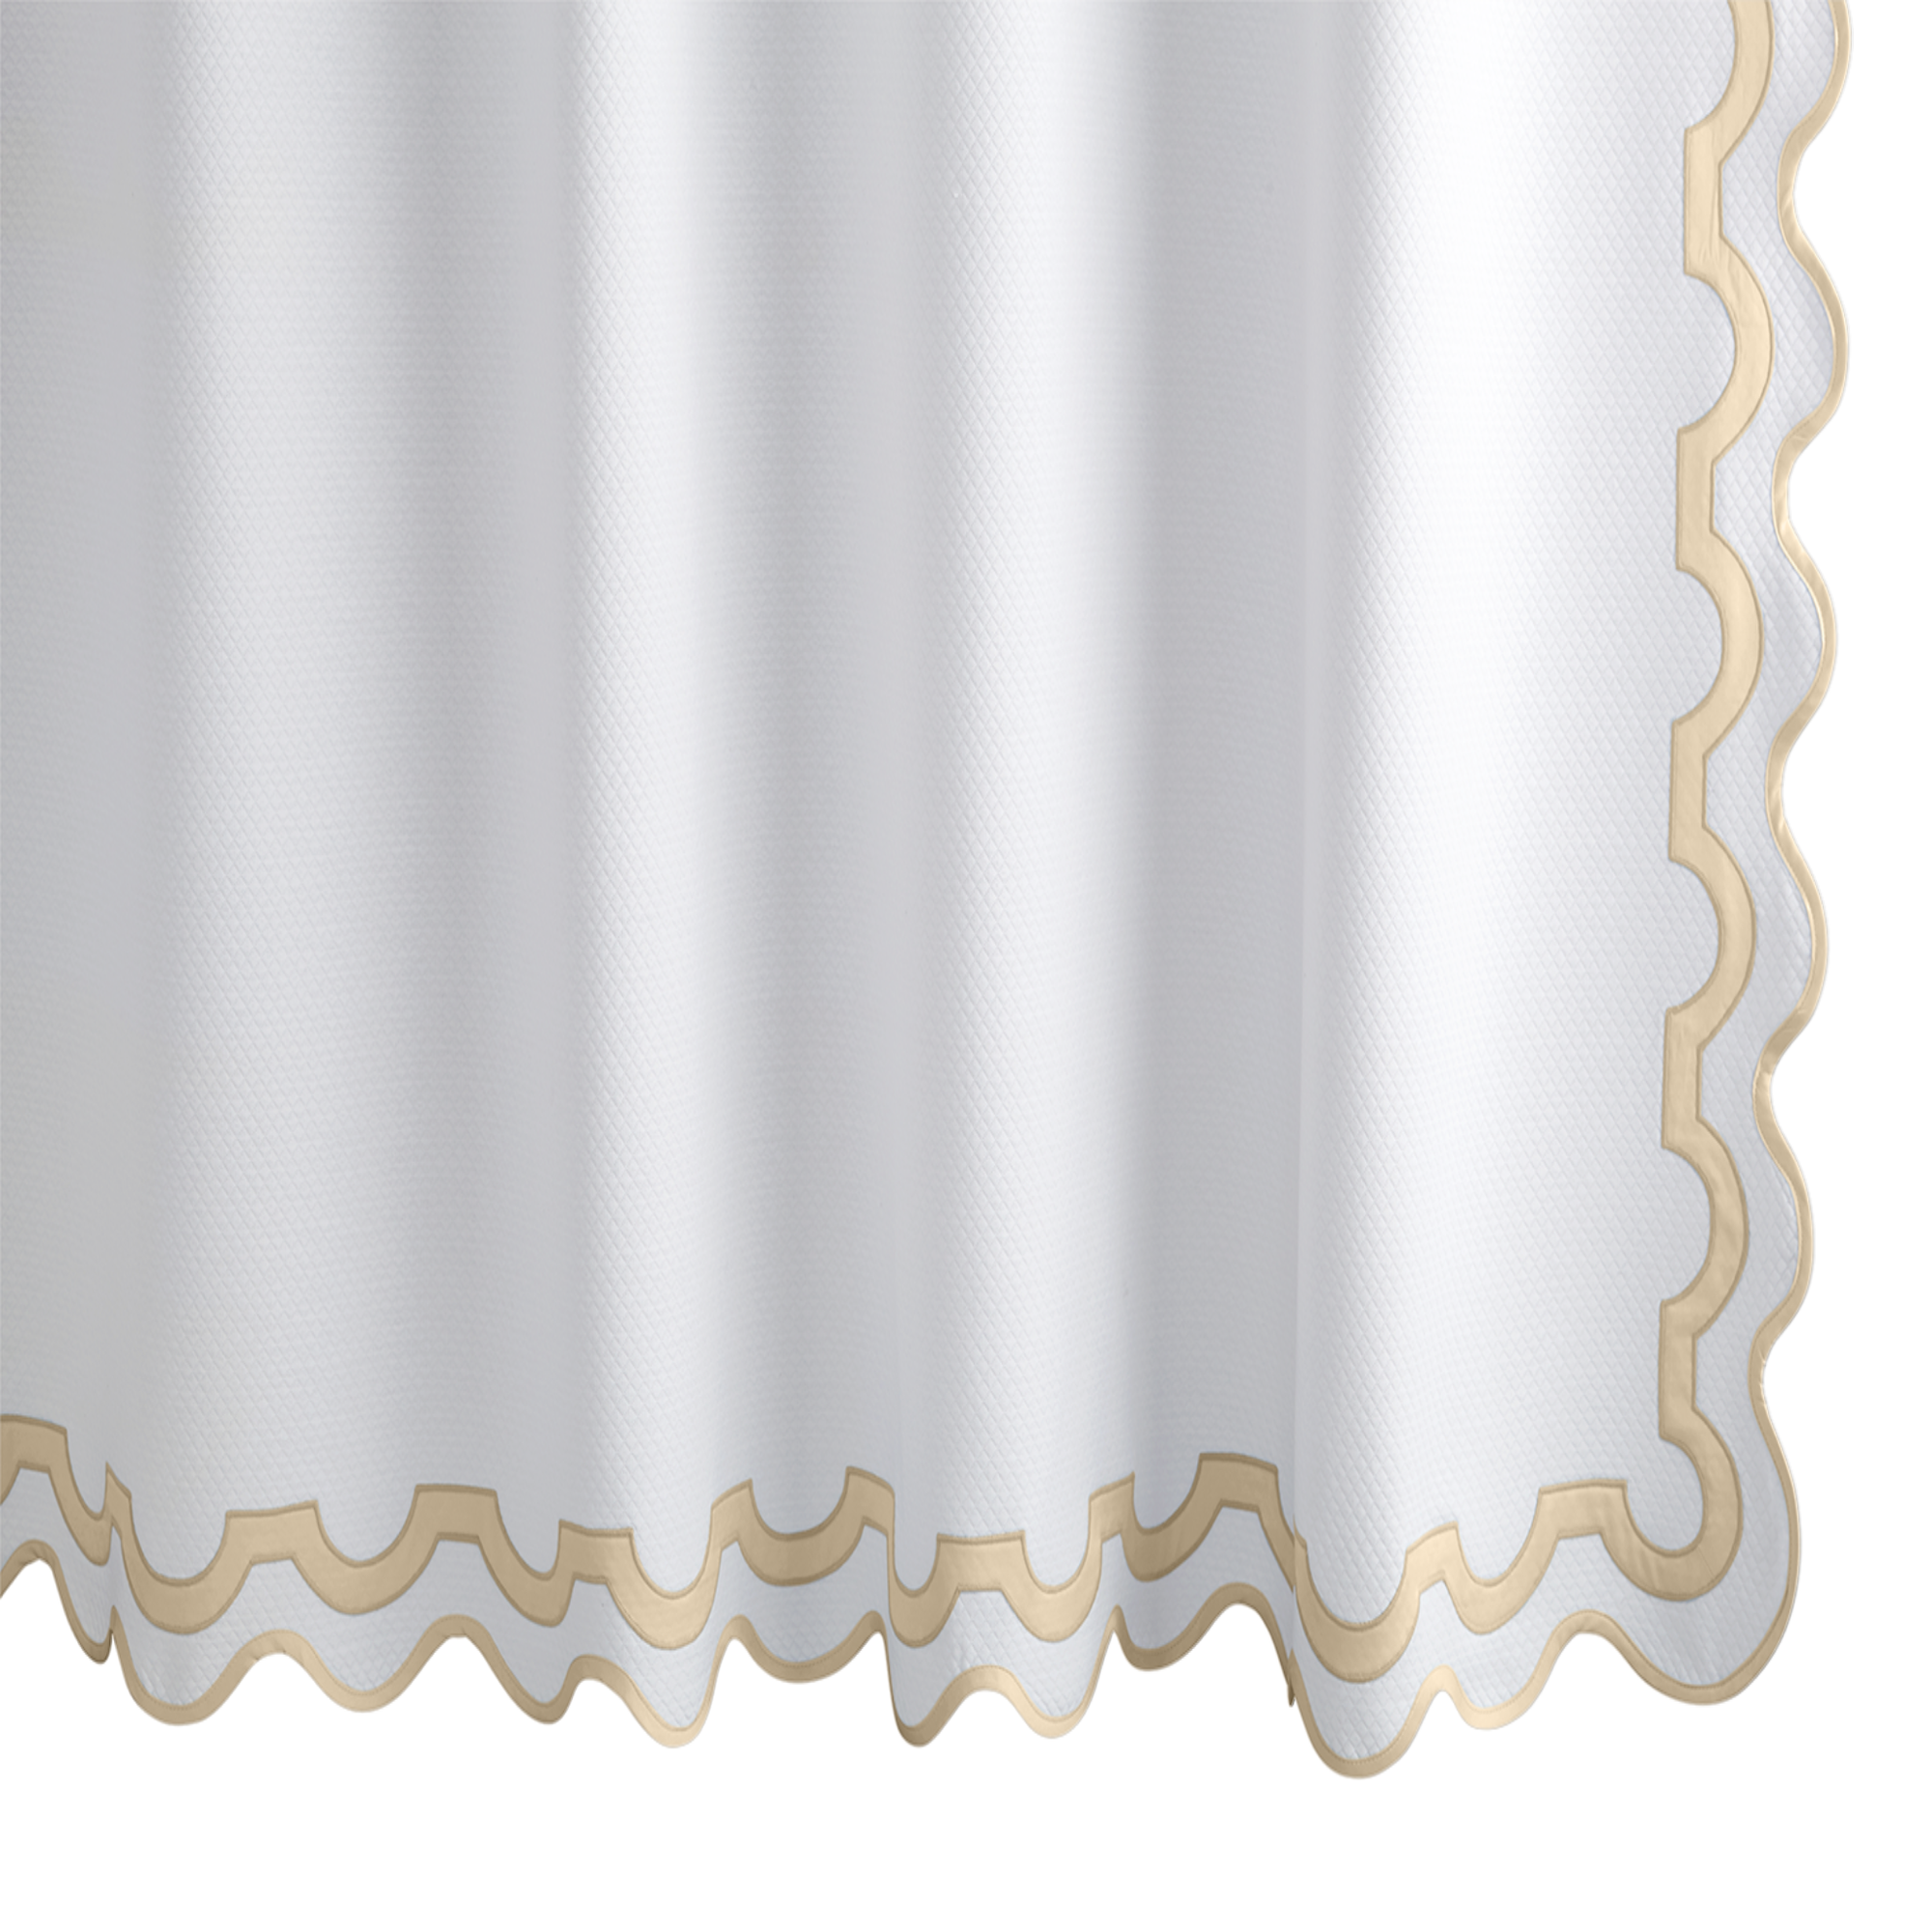 Hanging Edges of Matouk Mirasol Pique Shower Curtain in Champagne Color